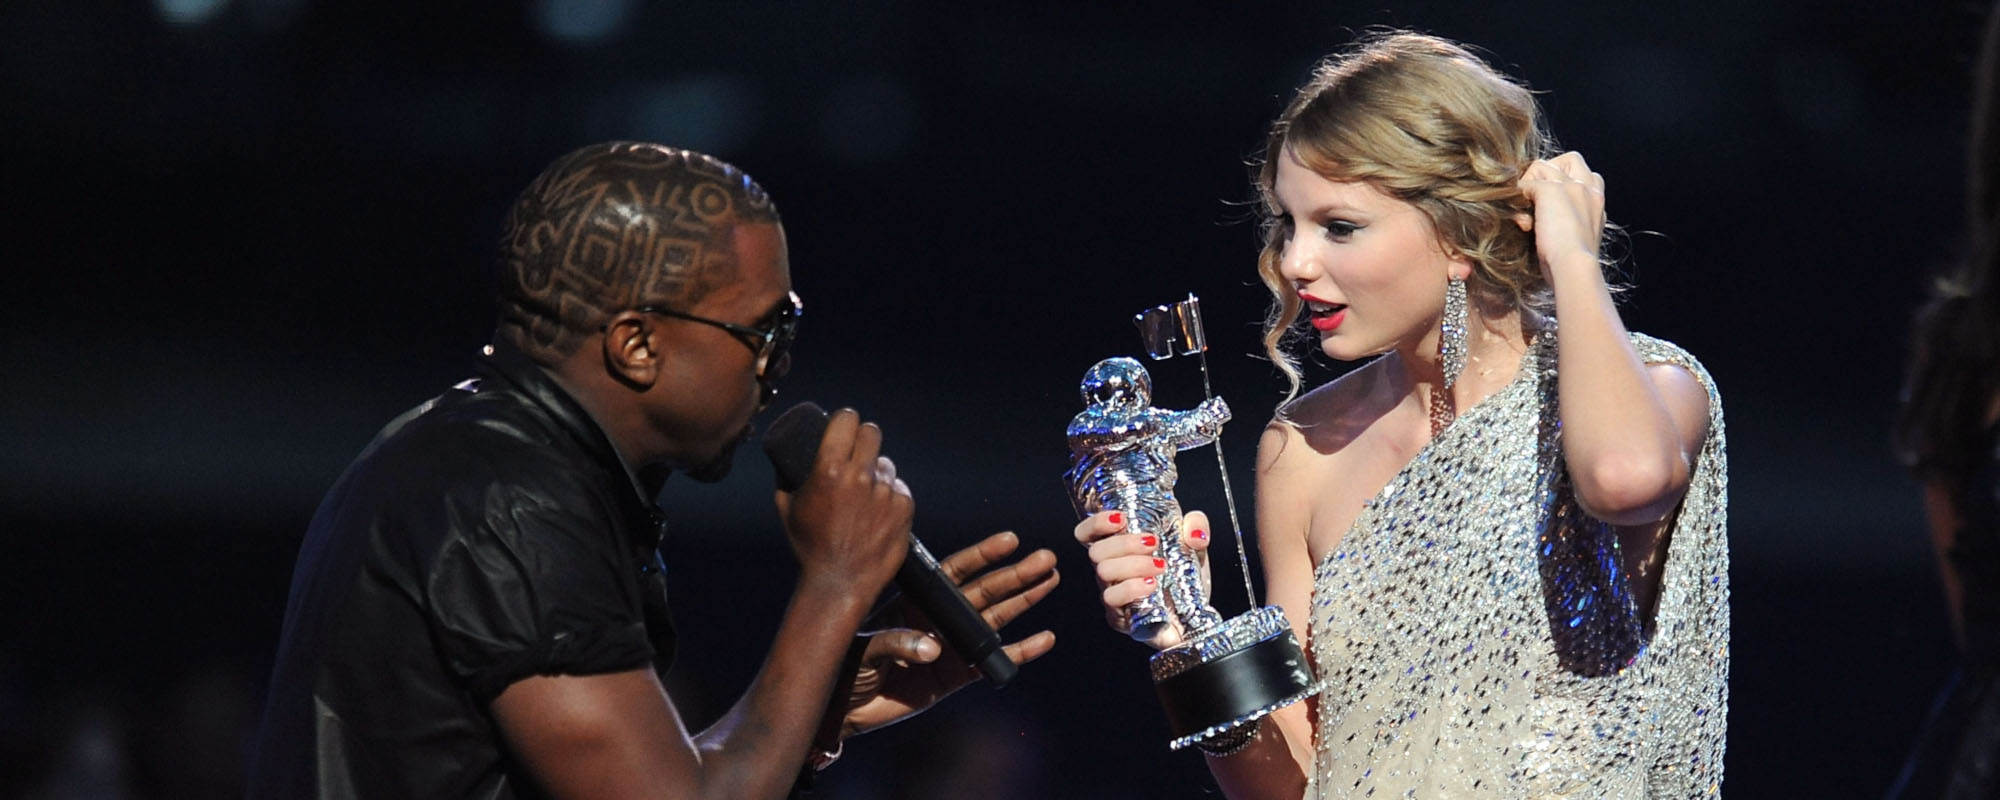 Behind the Beef: Examining the Feud Between Kanye West & Taylor Swift